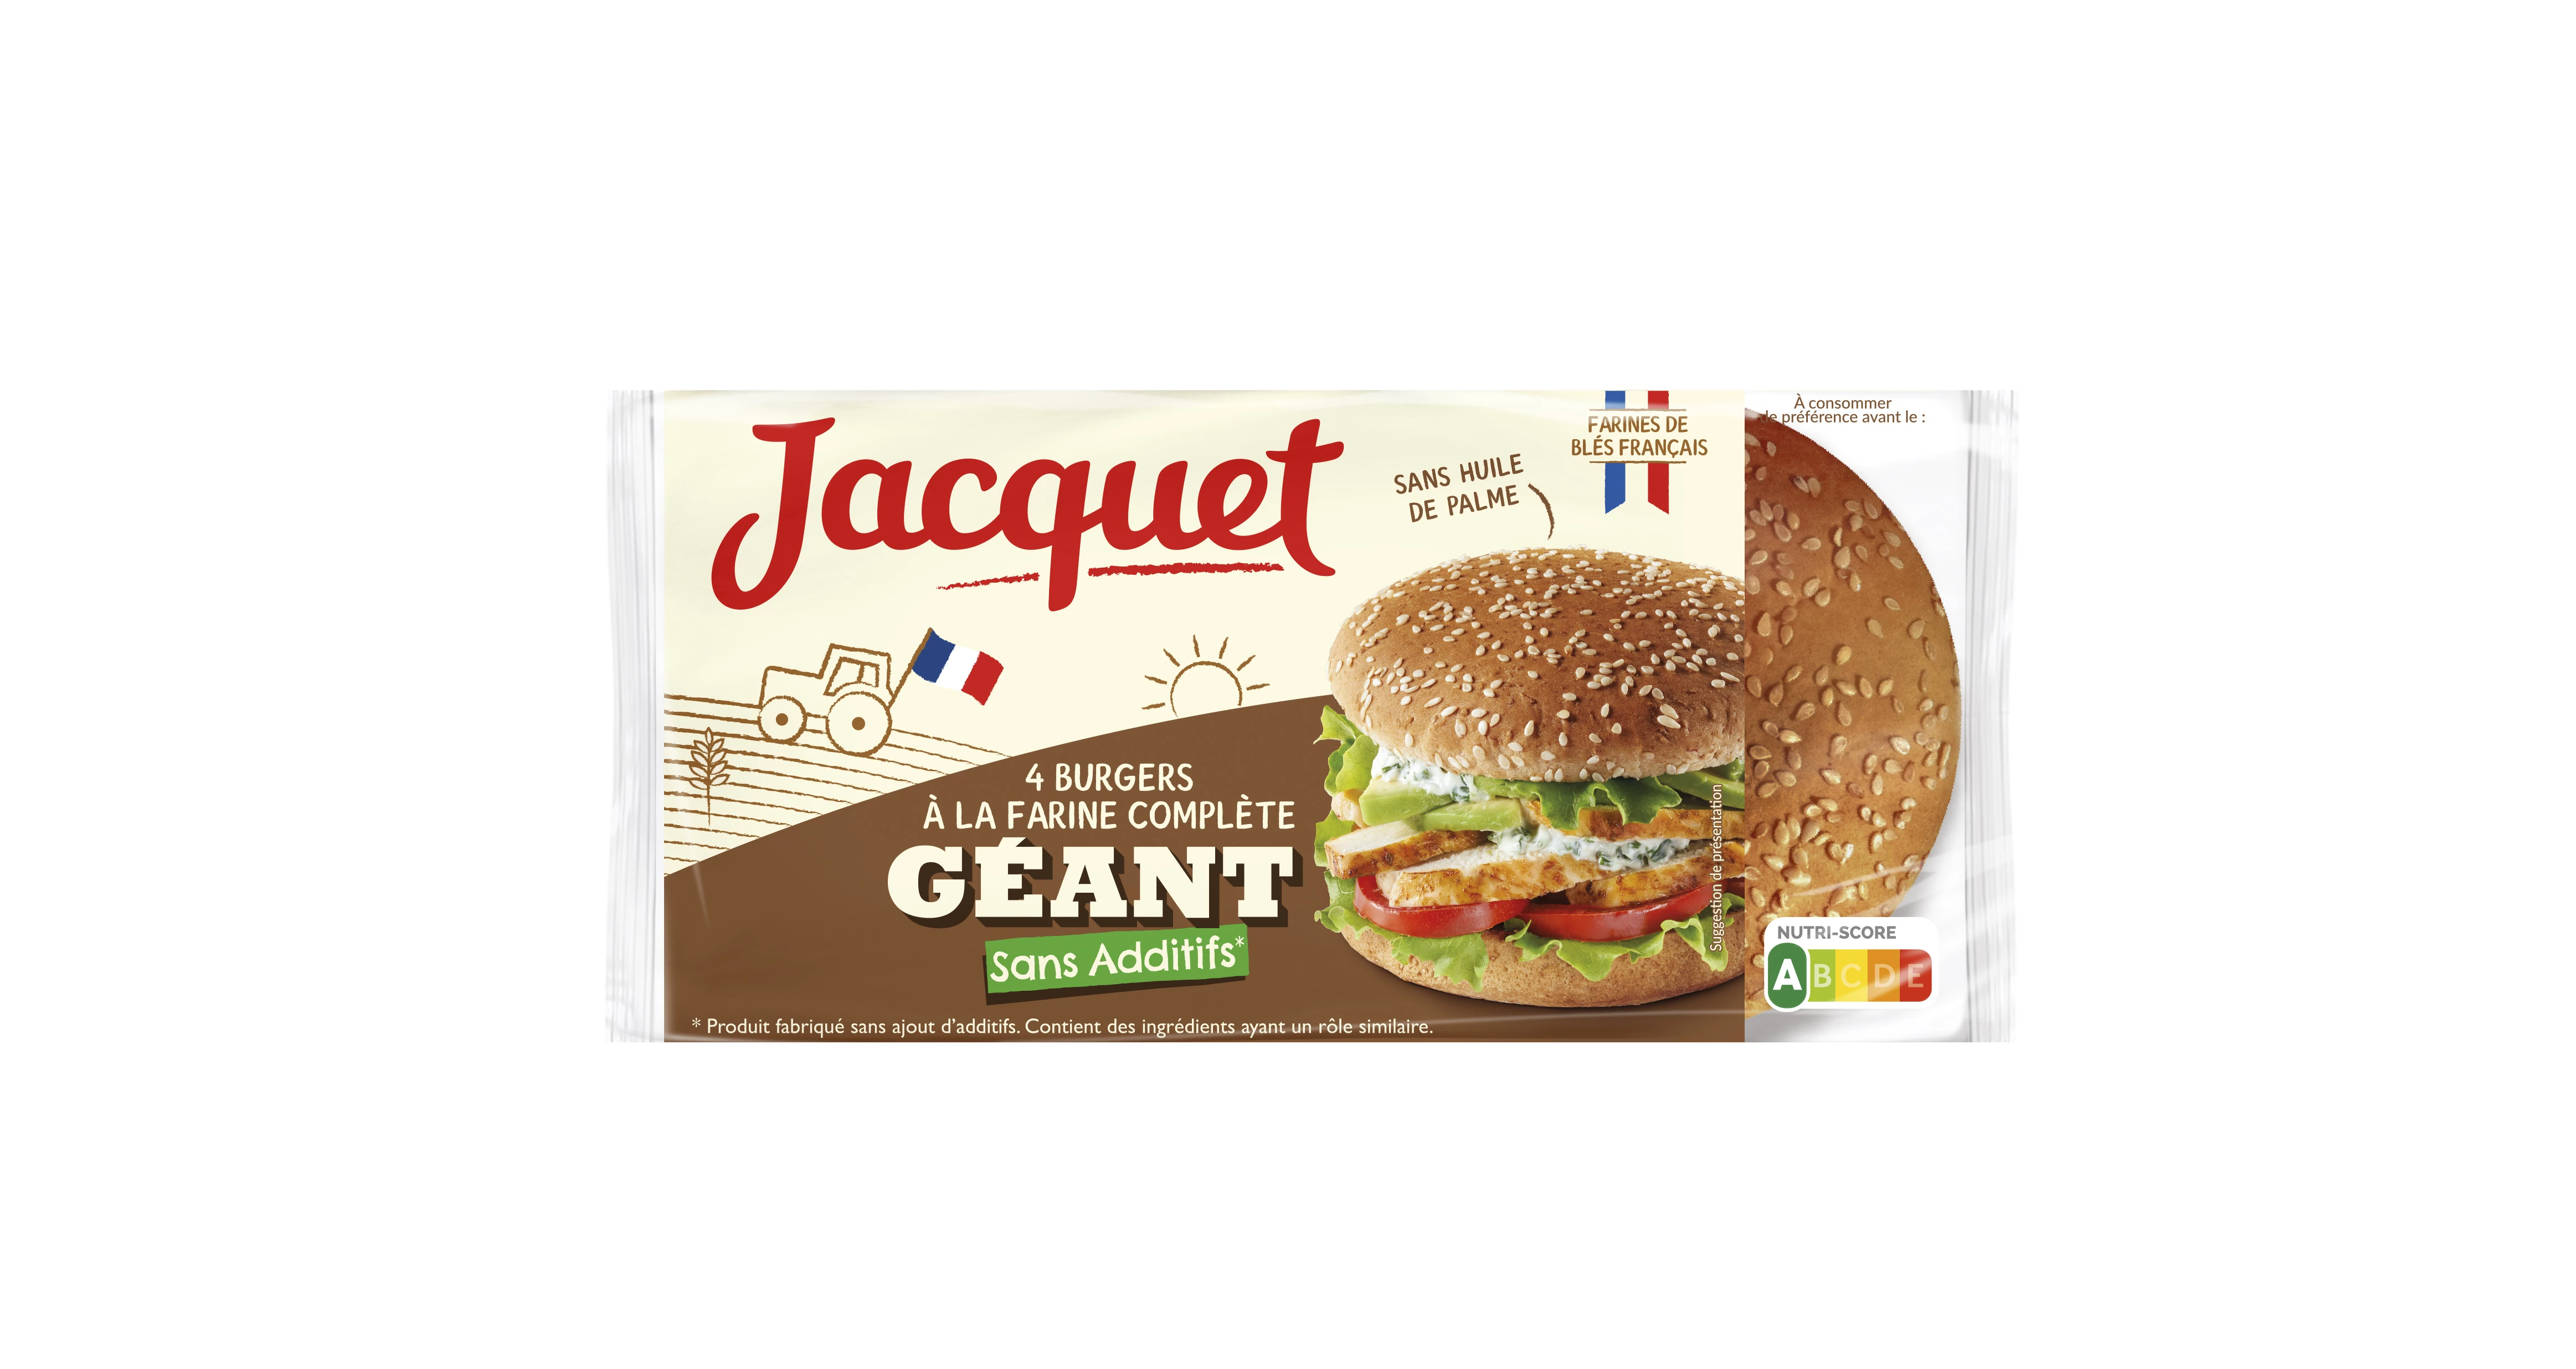 Burger Geant Complet Ss 广告 X4